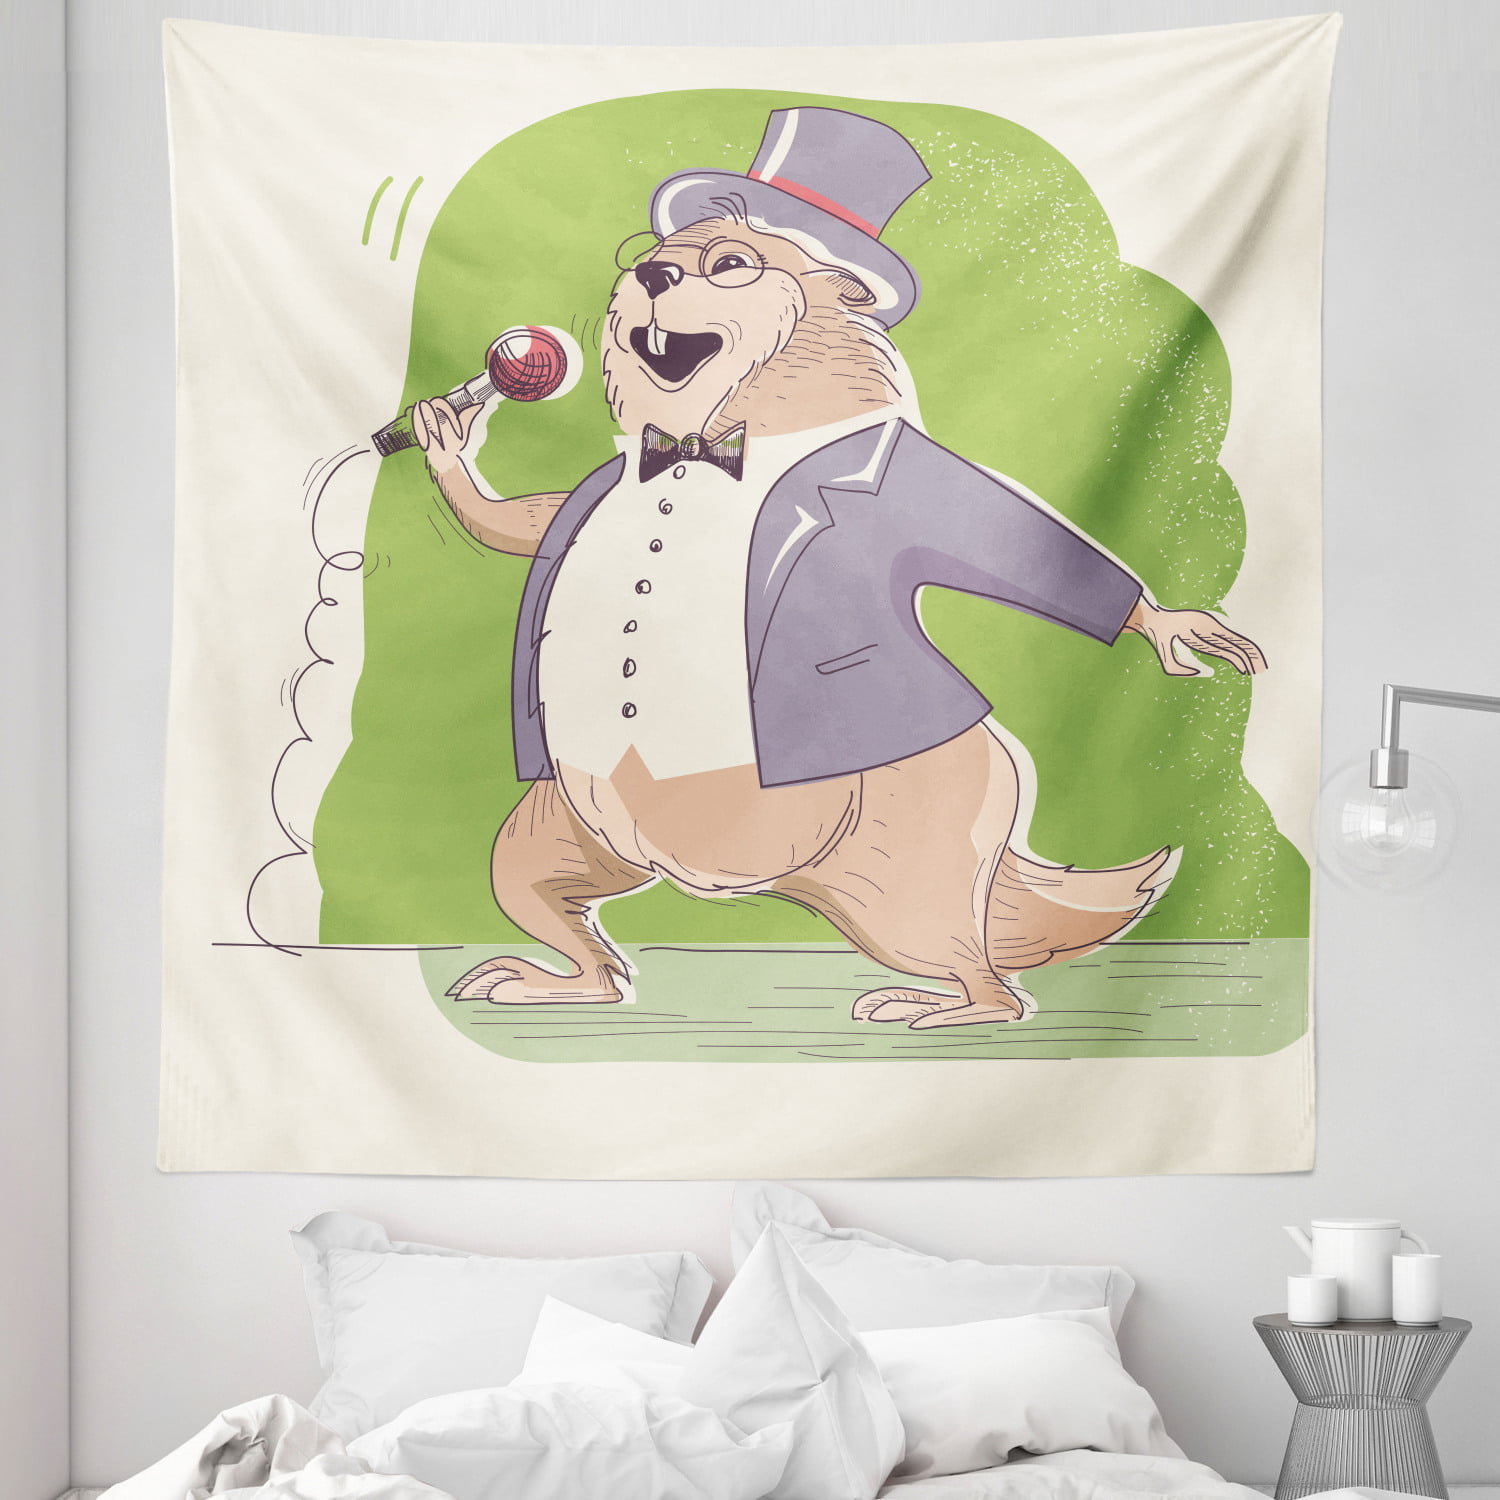 Groundhog Day Tapestry, Marmot Singer and Microphone Funny Design Cartoon,  Fabric Wall Hanging Decor for Bedroom Living Room Dorm, 5 Sizes, Lime Green  Mauve and Ecru, by Ambesonne 